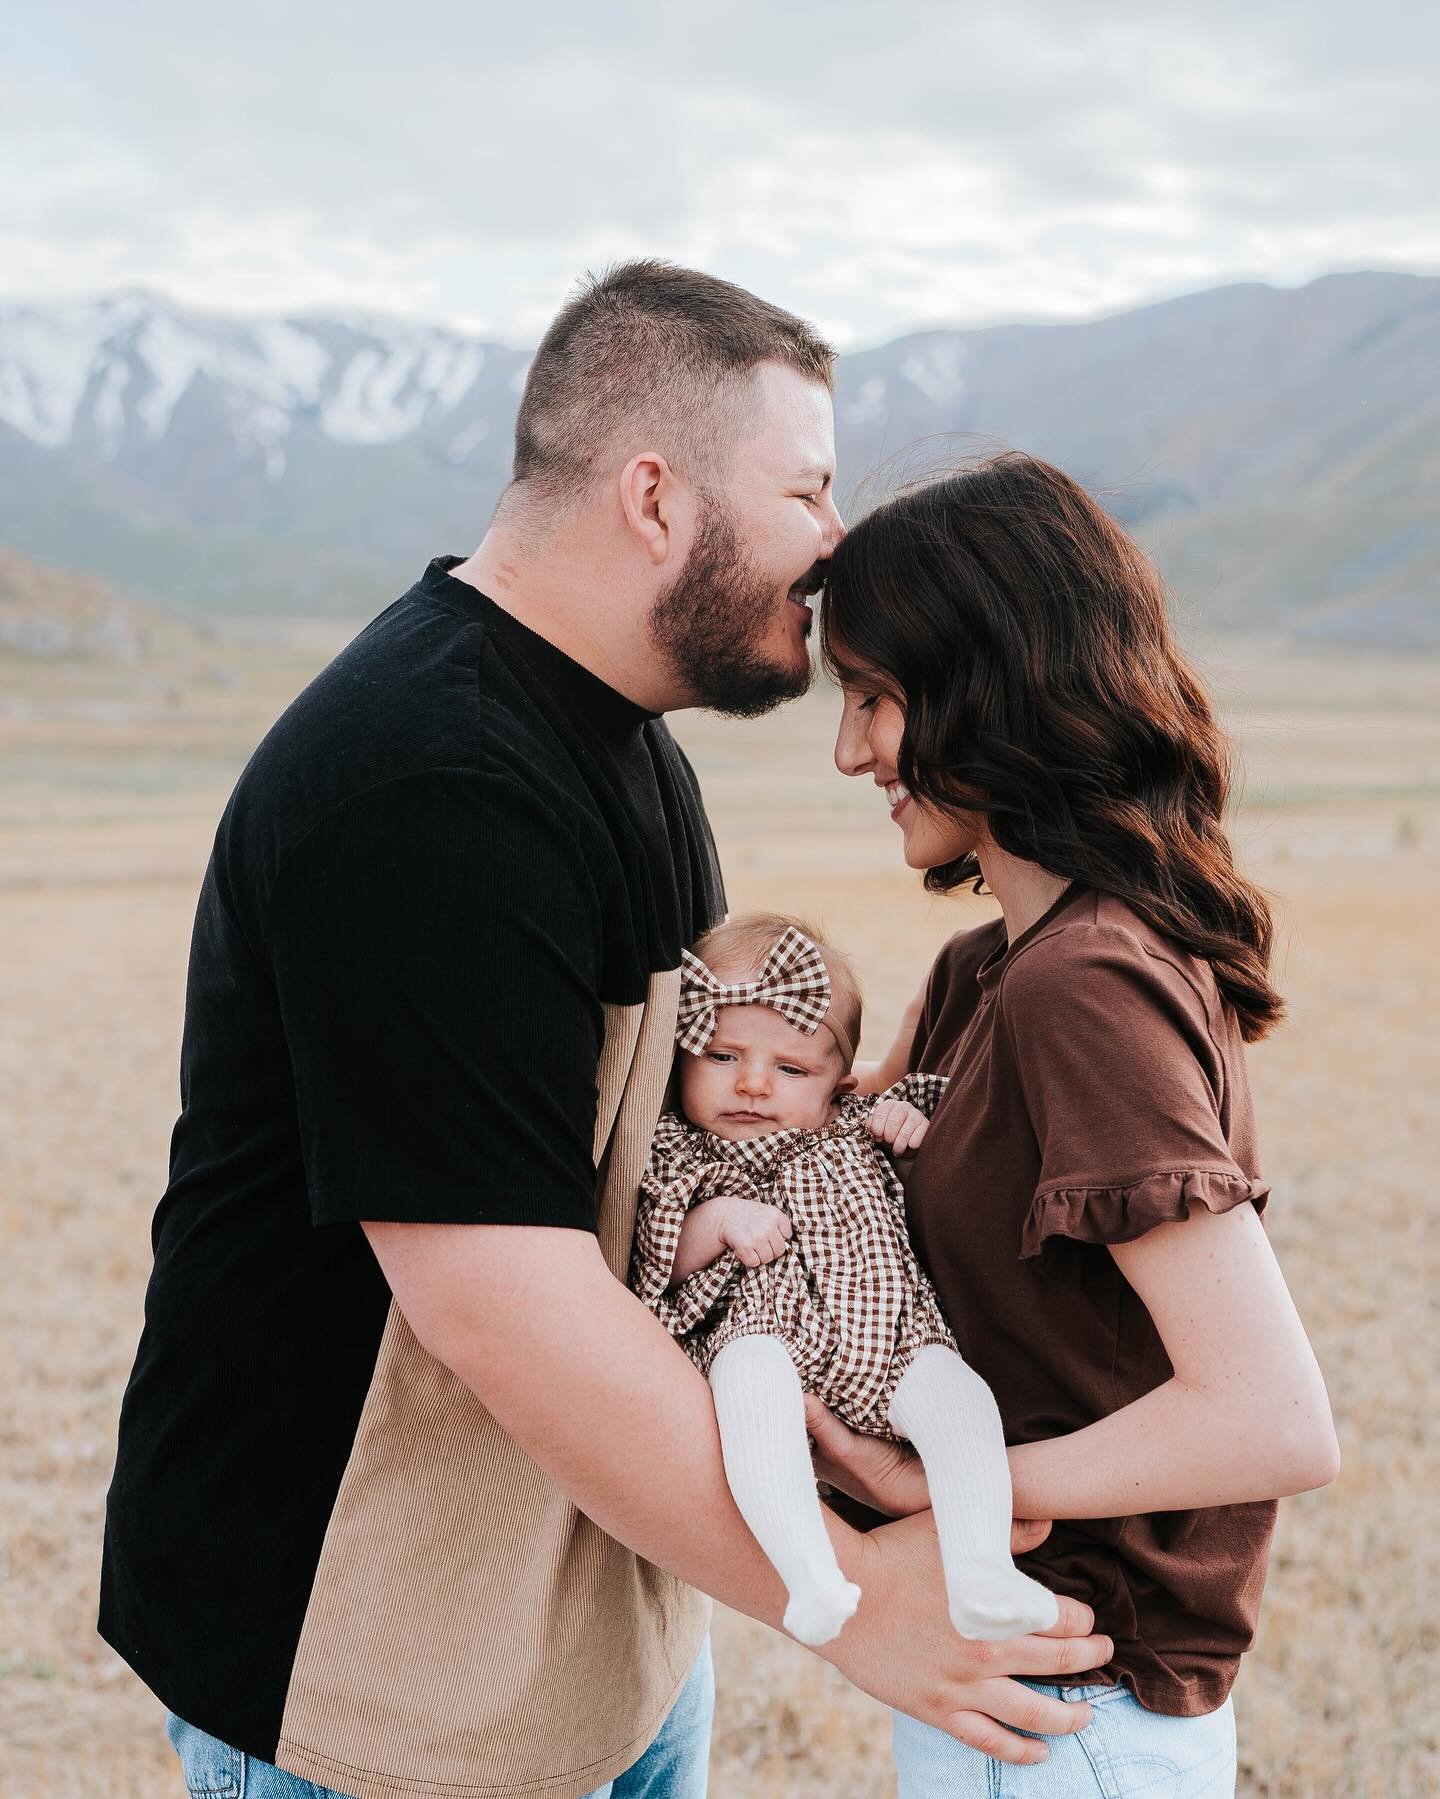 the mazur family &amp; thee sweetest baby girl lyla 🤍✨
&bull;
&bull;
during this shoot poor little lyla did not love the sun, she had a little spit up, crying, the bugs were swarming us, but through it all i got to capture special memories that will